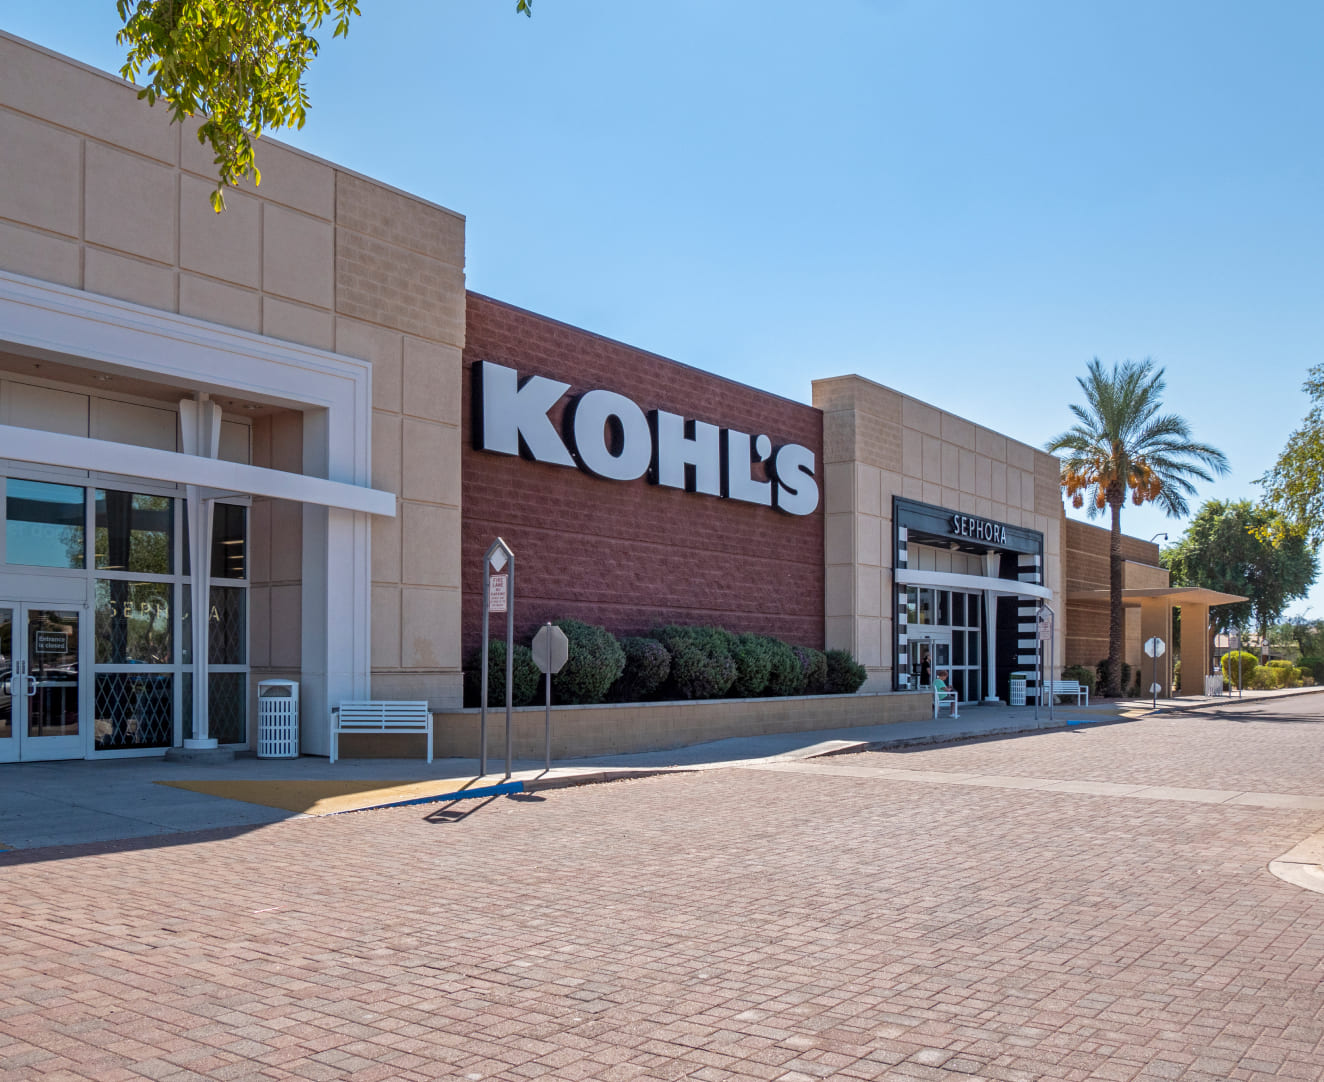 The entrance of Kohl's located at 1161 N. Dysart Road in Avondale, AZ.